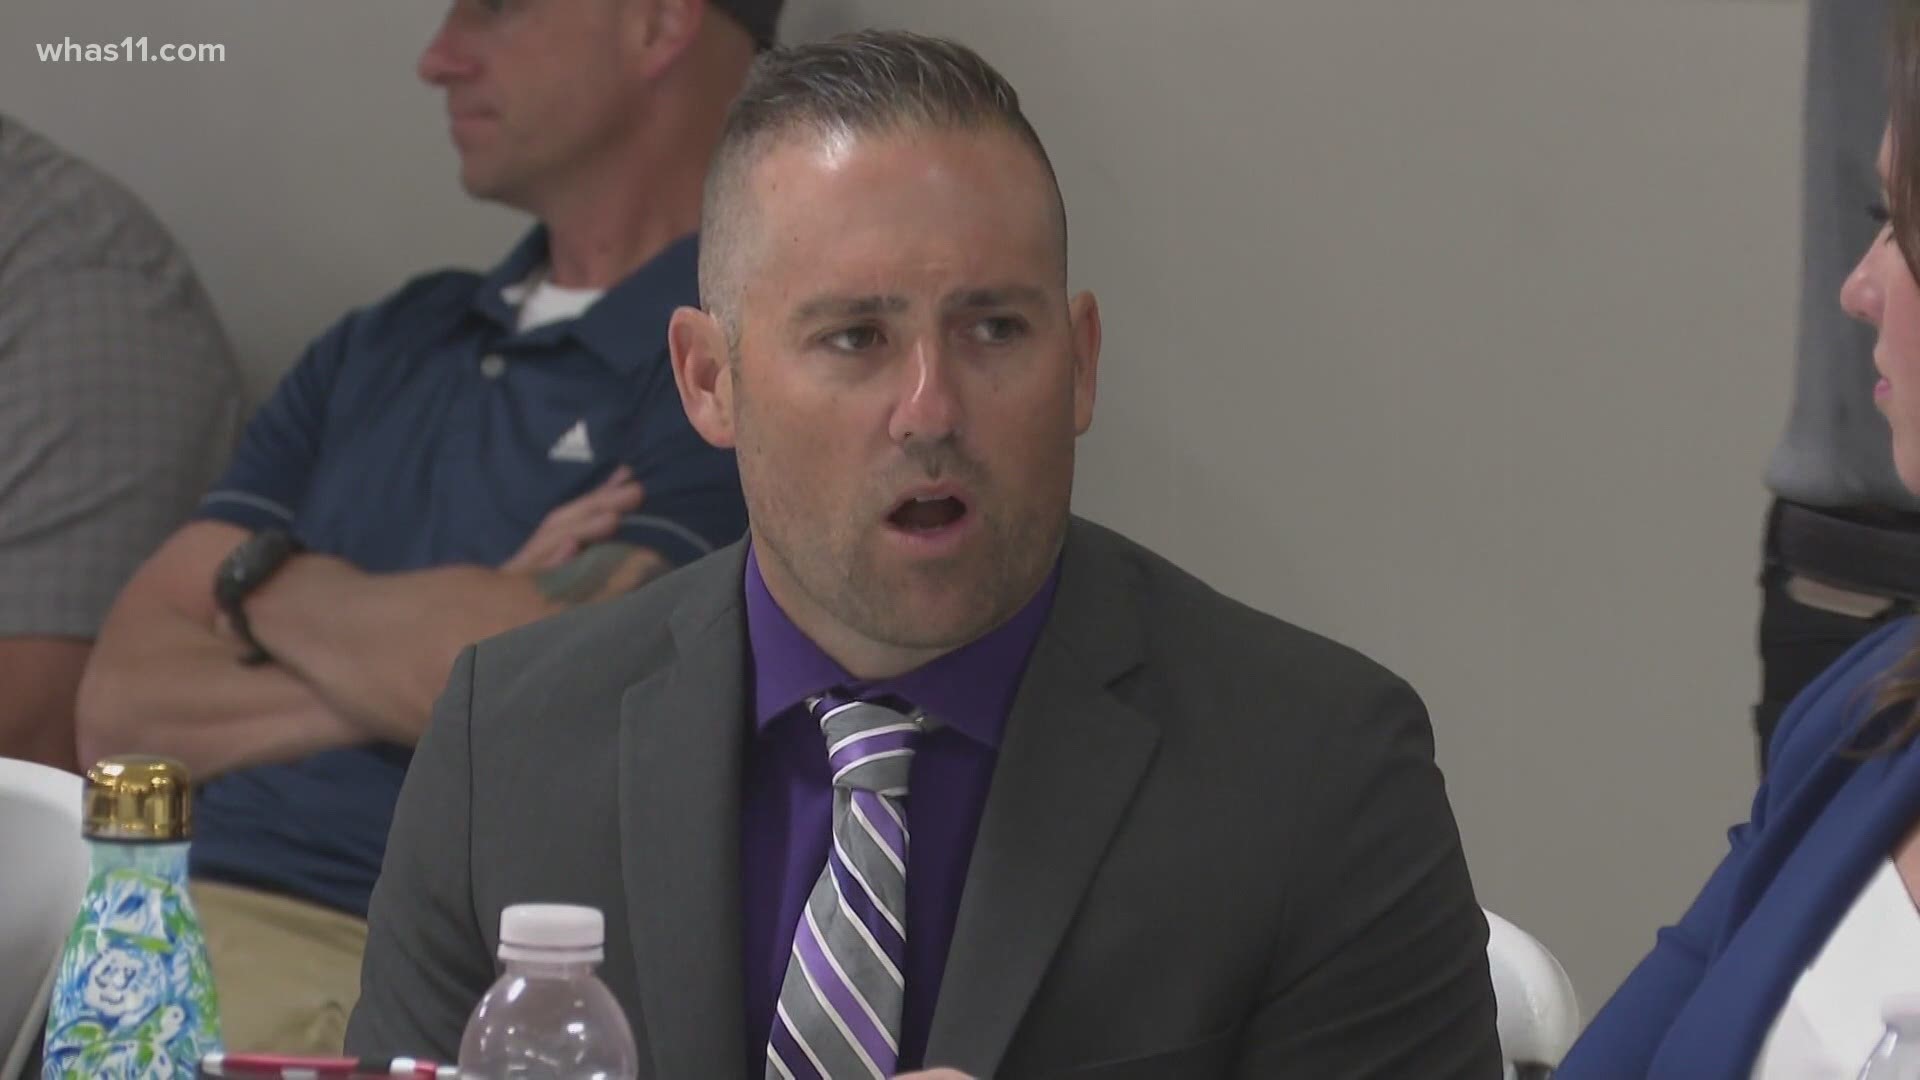 Fired LMPD detective Joshua Jaynes will not be returning to the force. The department's merit board unanimously voted to uphold the termination.